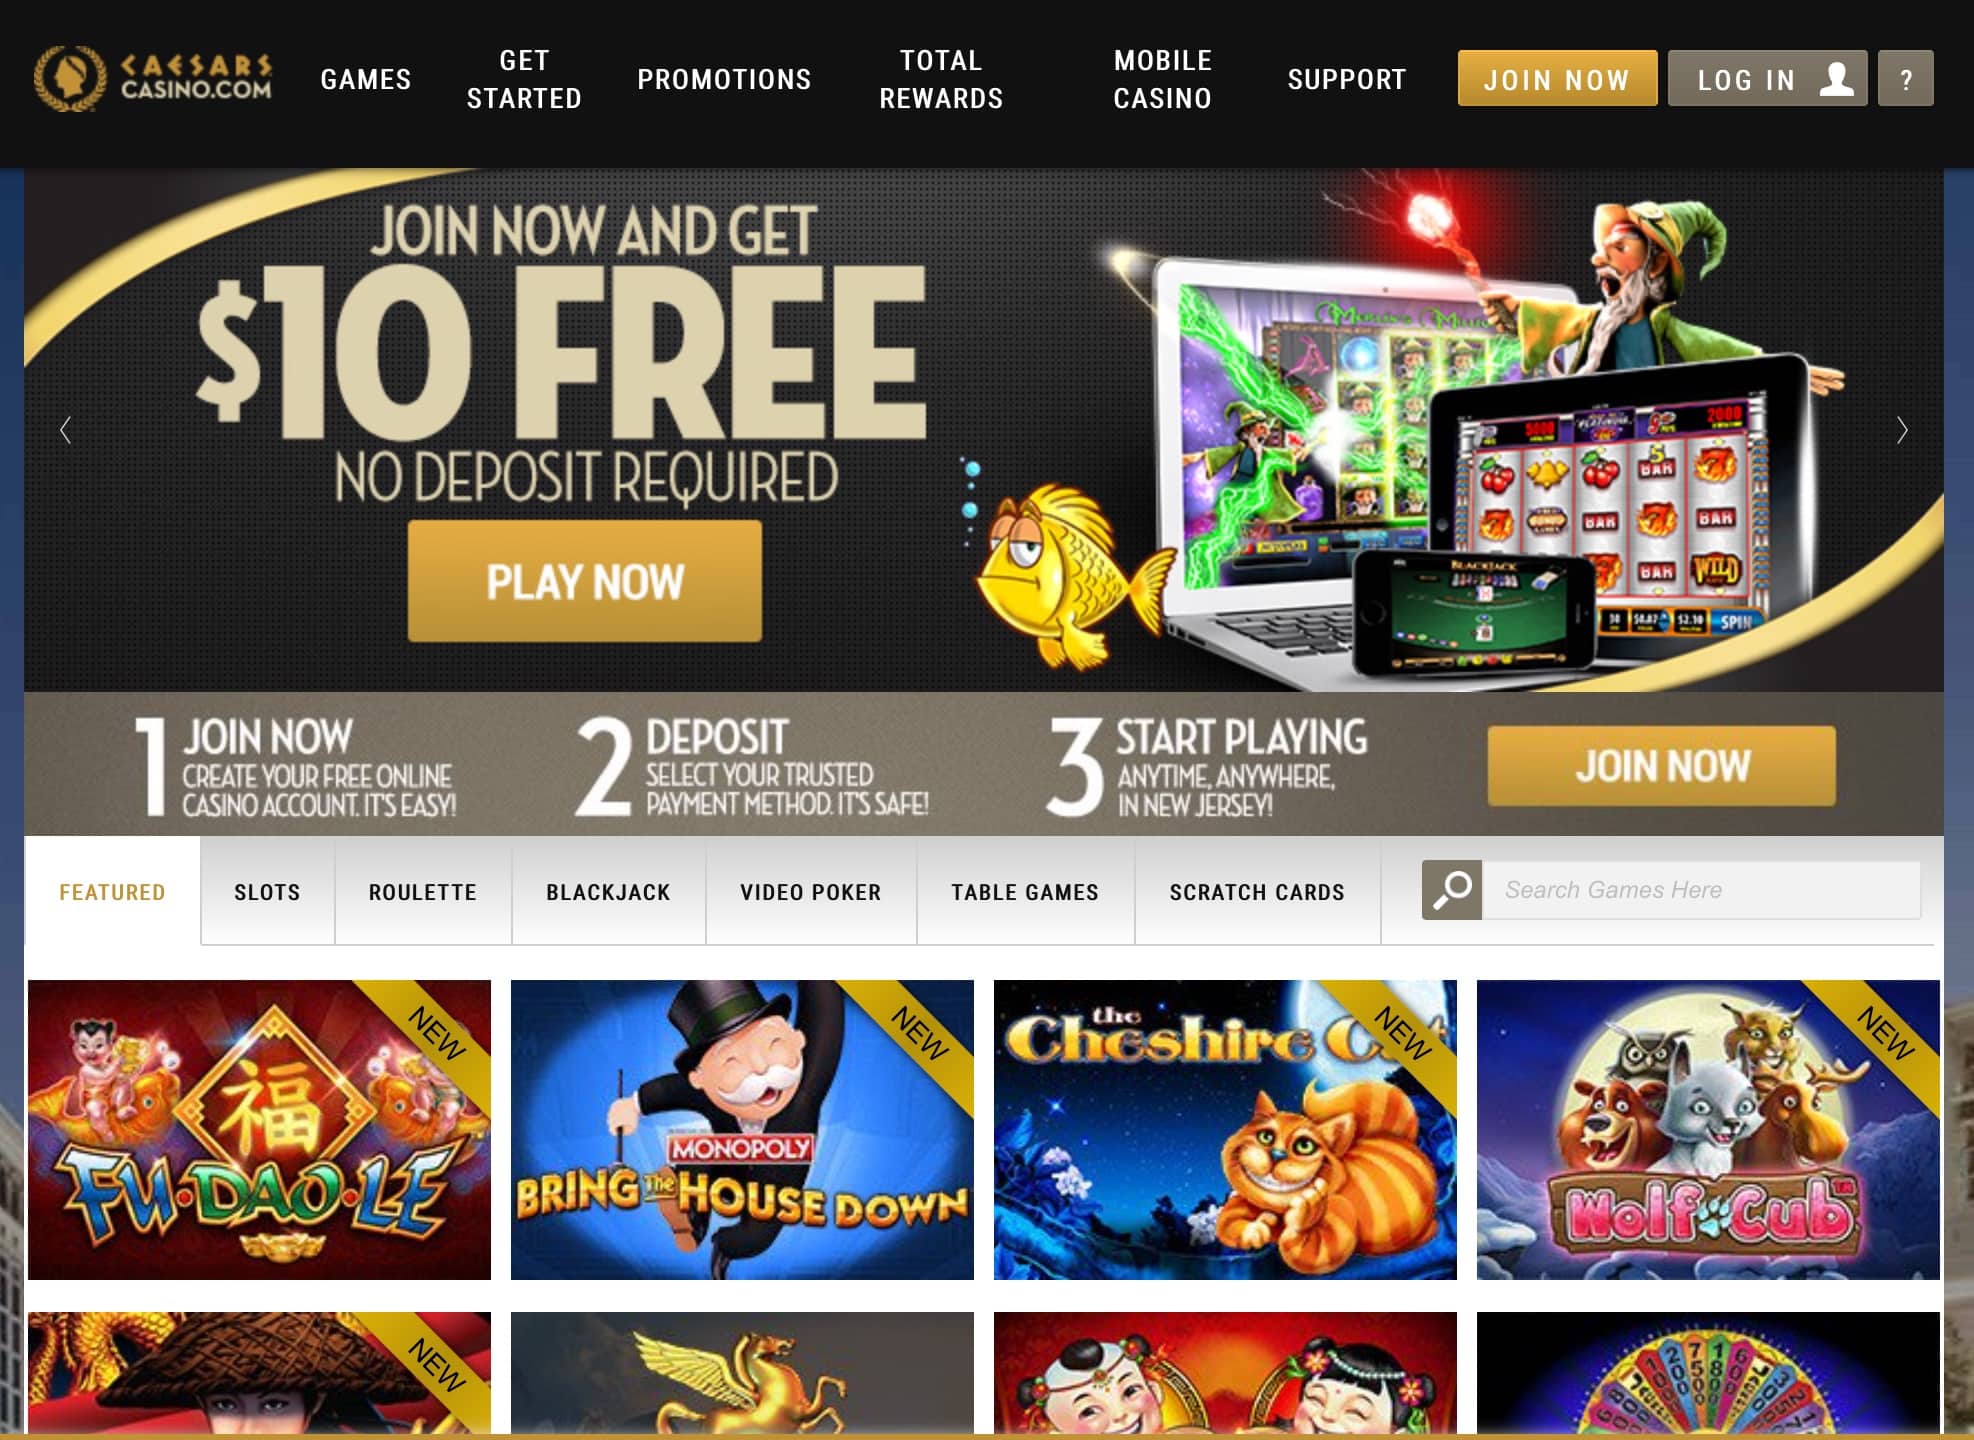 How many online casinos in new jersey